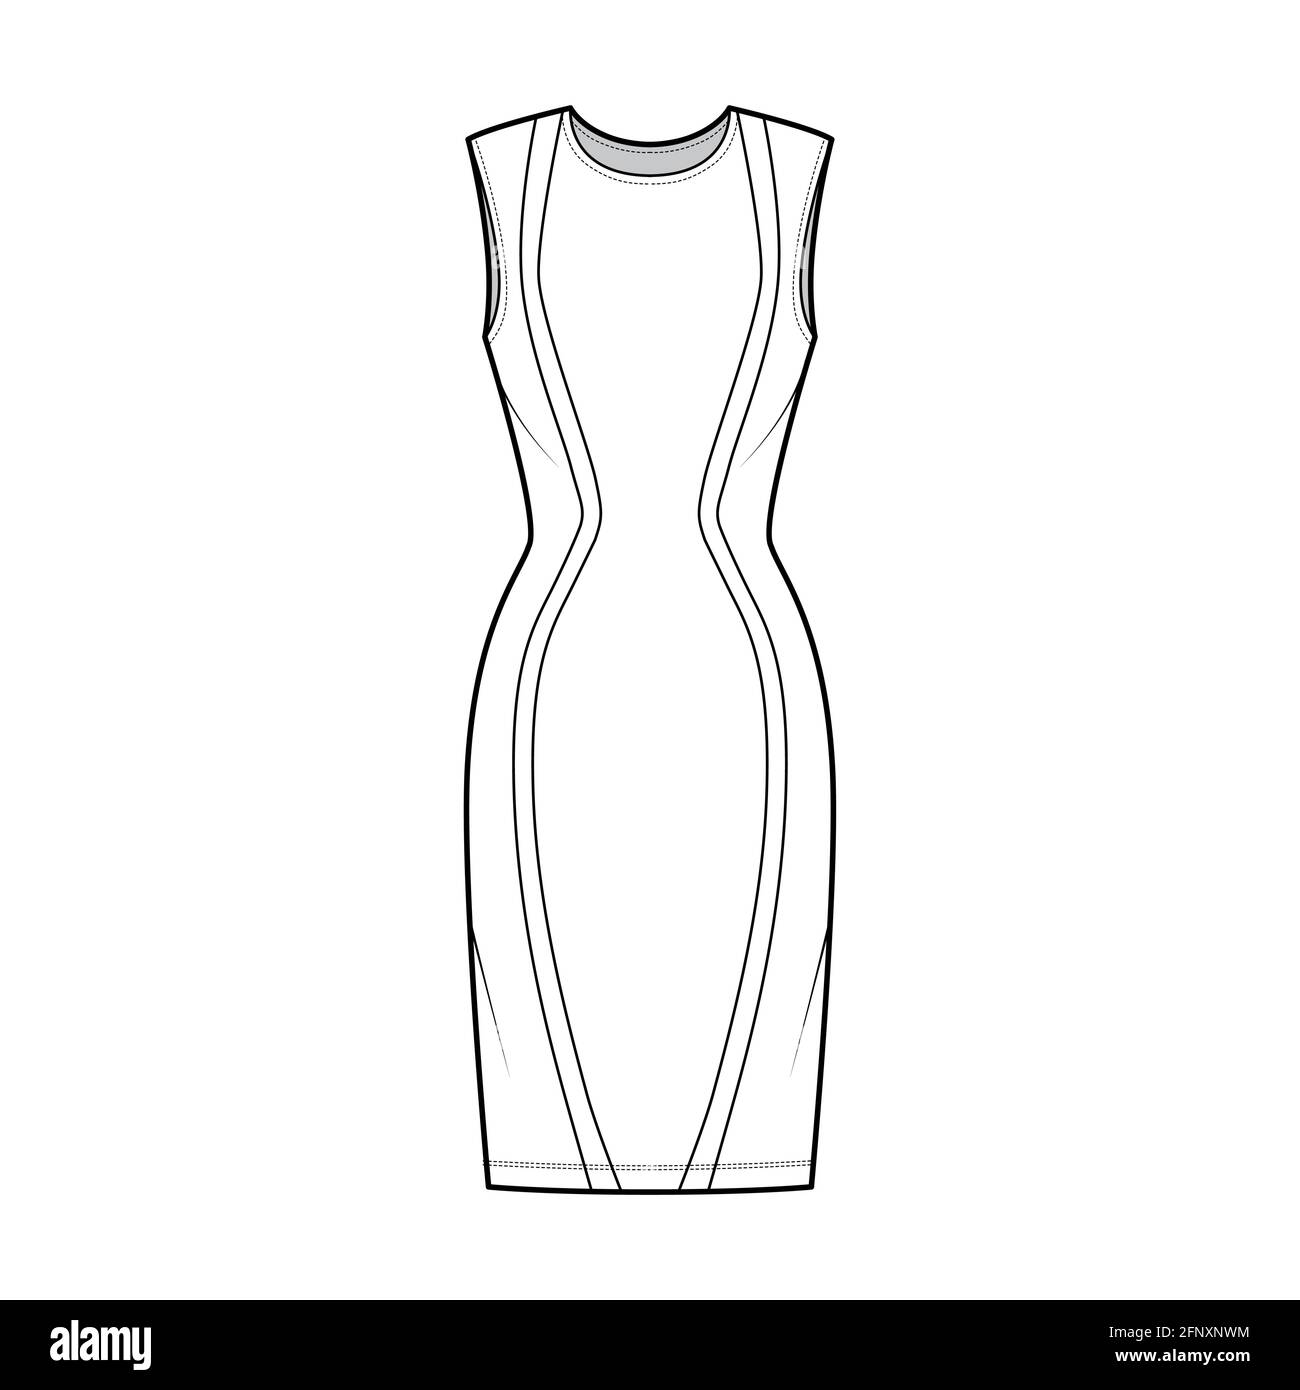 Dress panel technical fashion illustration with hourglass silhouette ...